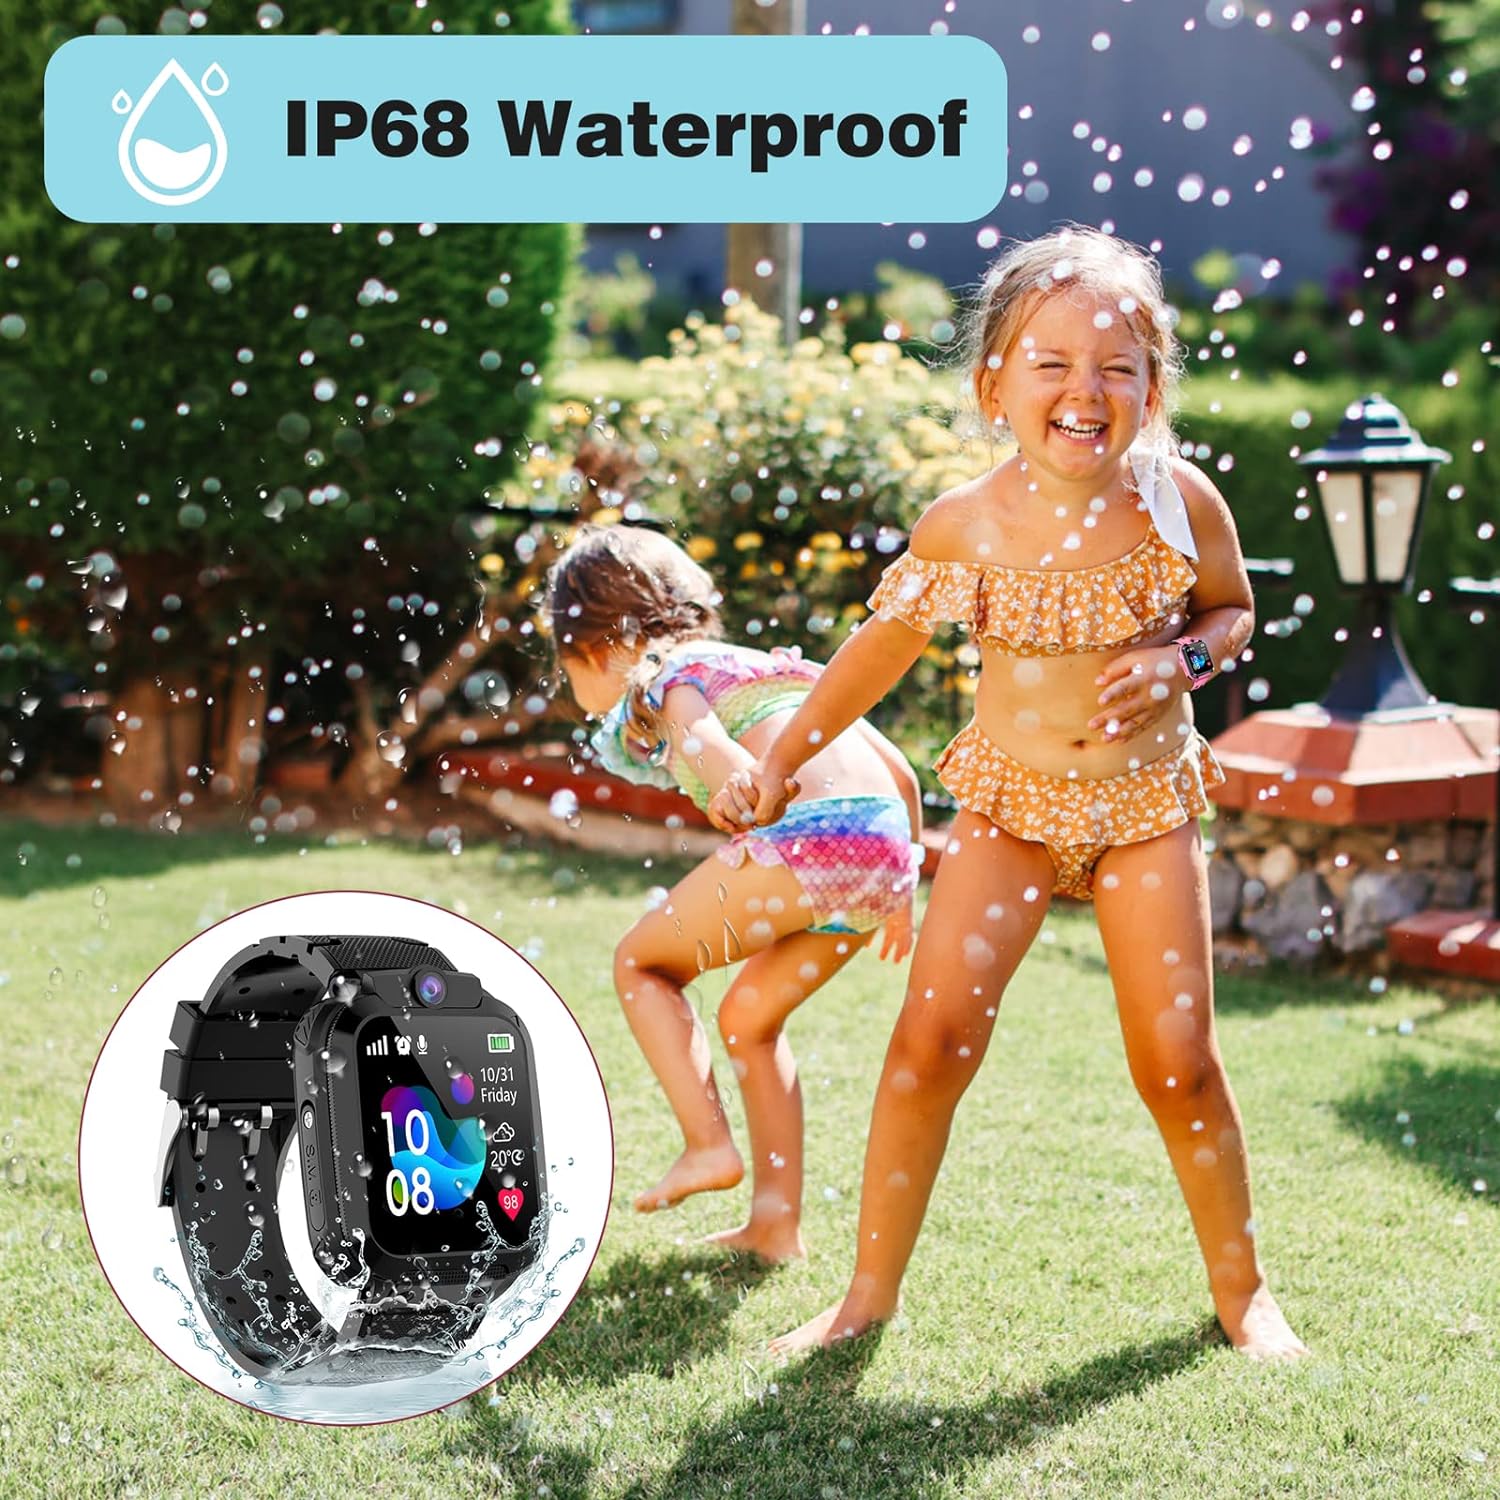 Children's GPS Watch, Children's Smartwatch with GPS and Calls IP68 Waterproof, Boy's Girls' Smart Watch with Touch Screen and SOS, Game, Music, Camera, Alarm Clock, Gift for Student Boys and Girls